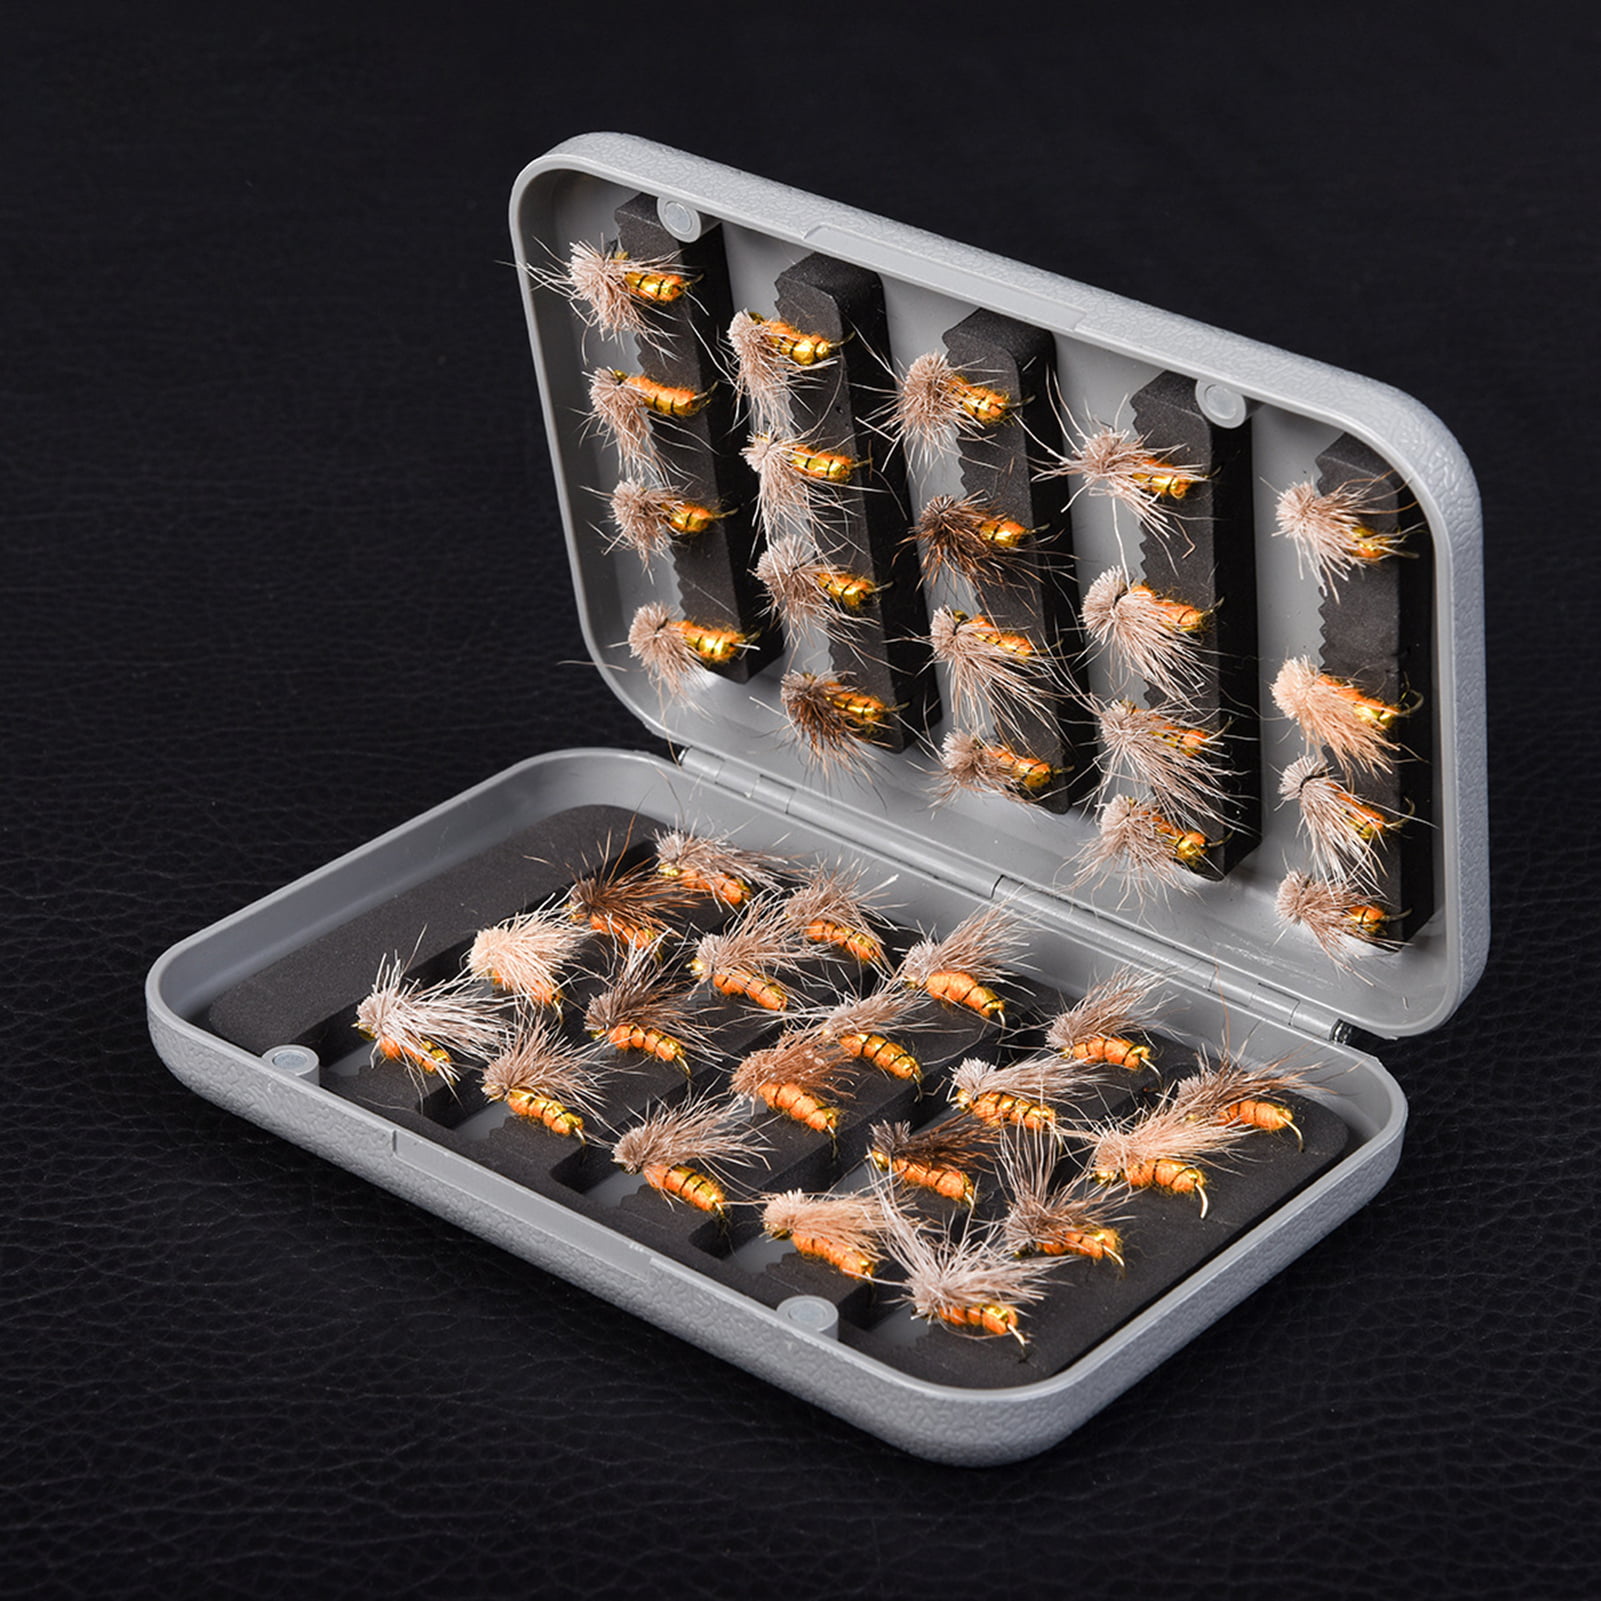 40PCS Fly Fishing Lure Trout Bait with Hook Flies Assortment Kit Nymph Wet  and Dry Flies with Storage Box